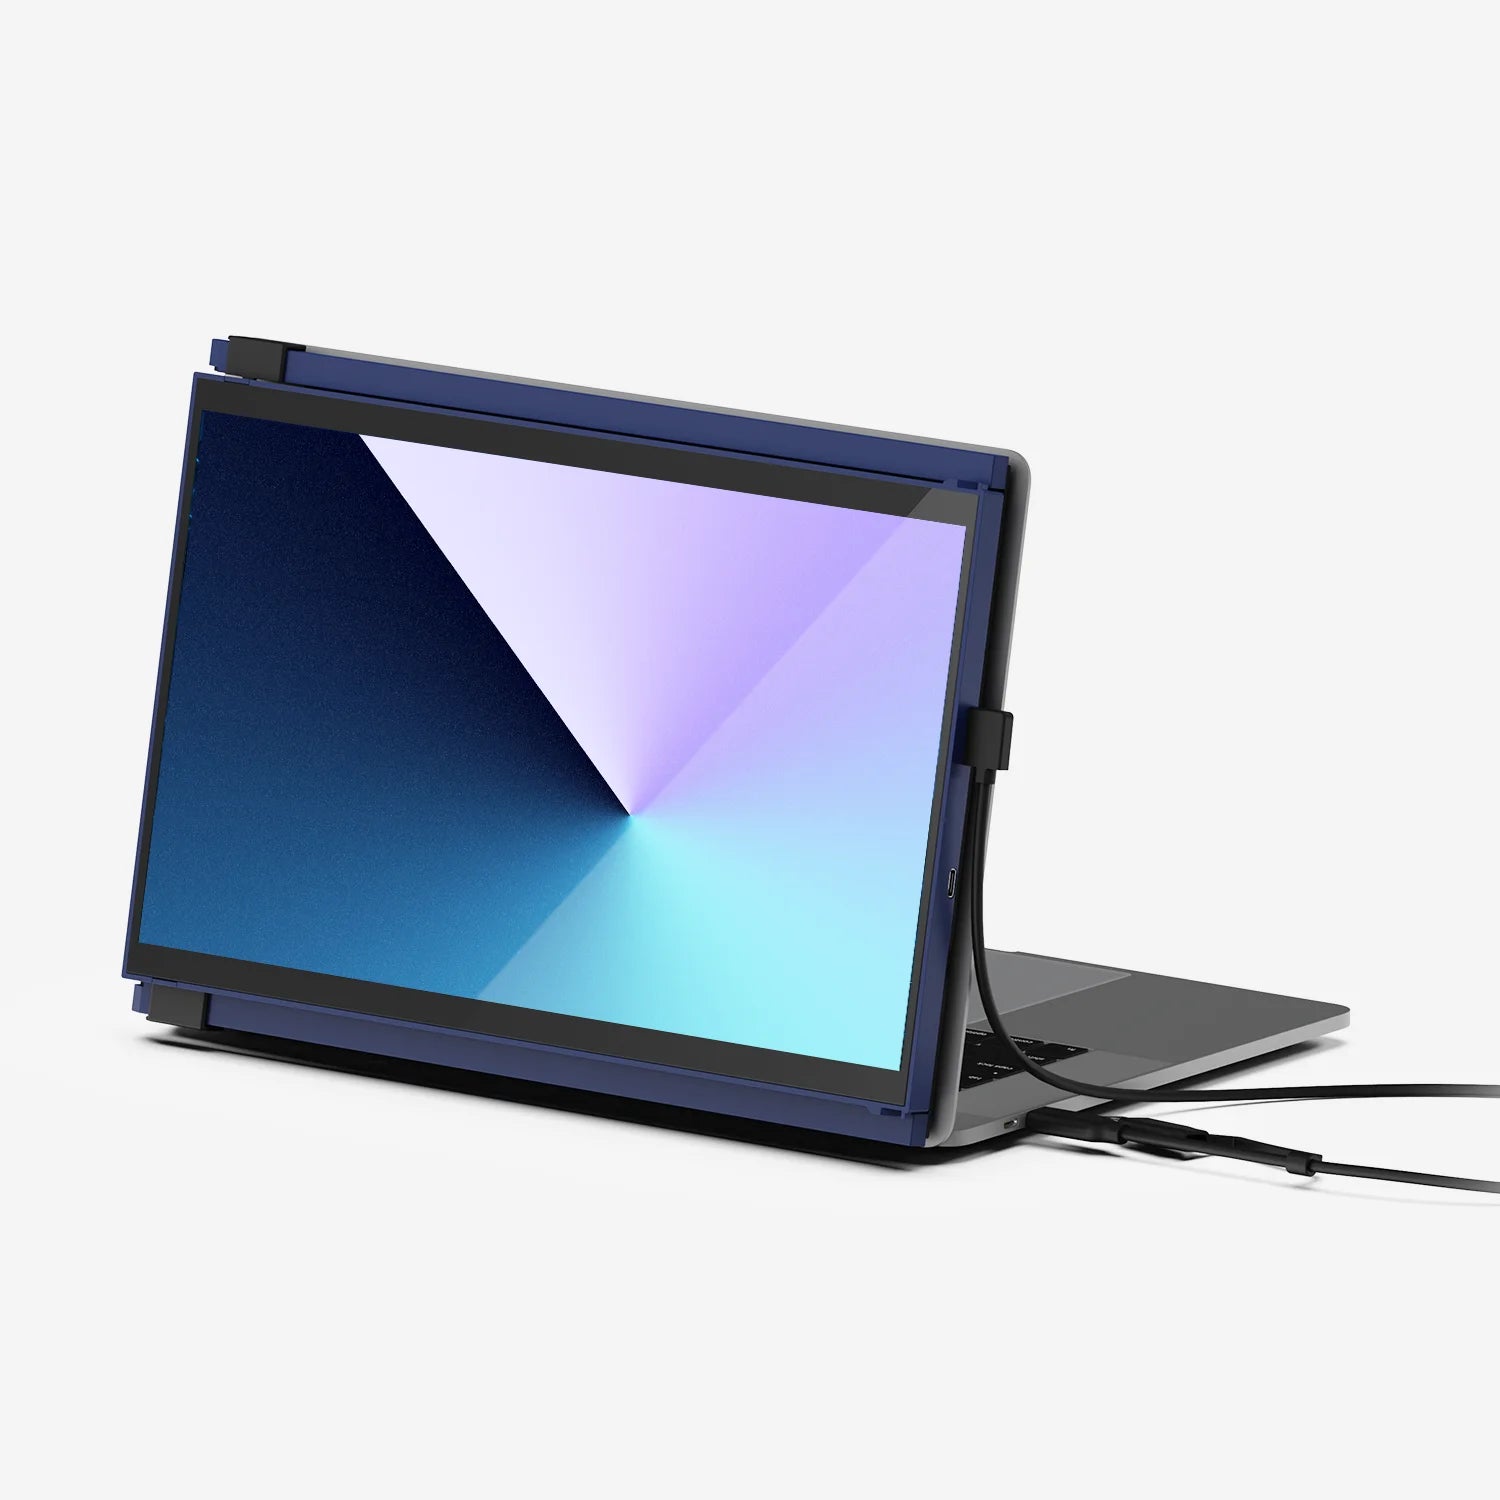 Duex Max Portable Dual Monitor for Laptop